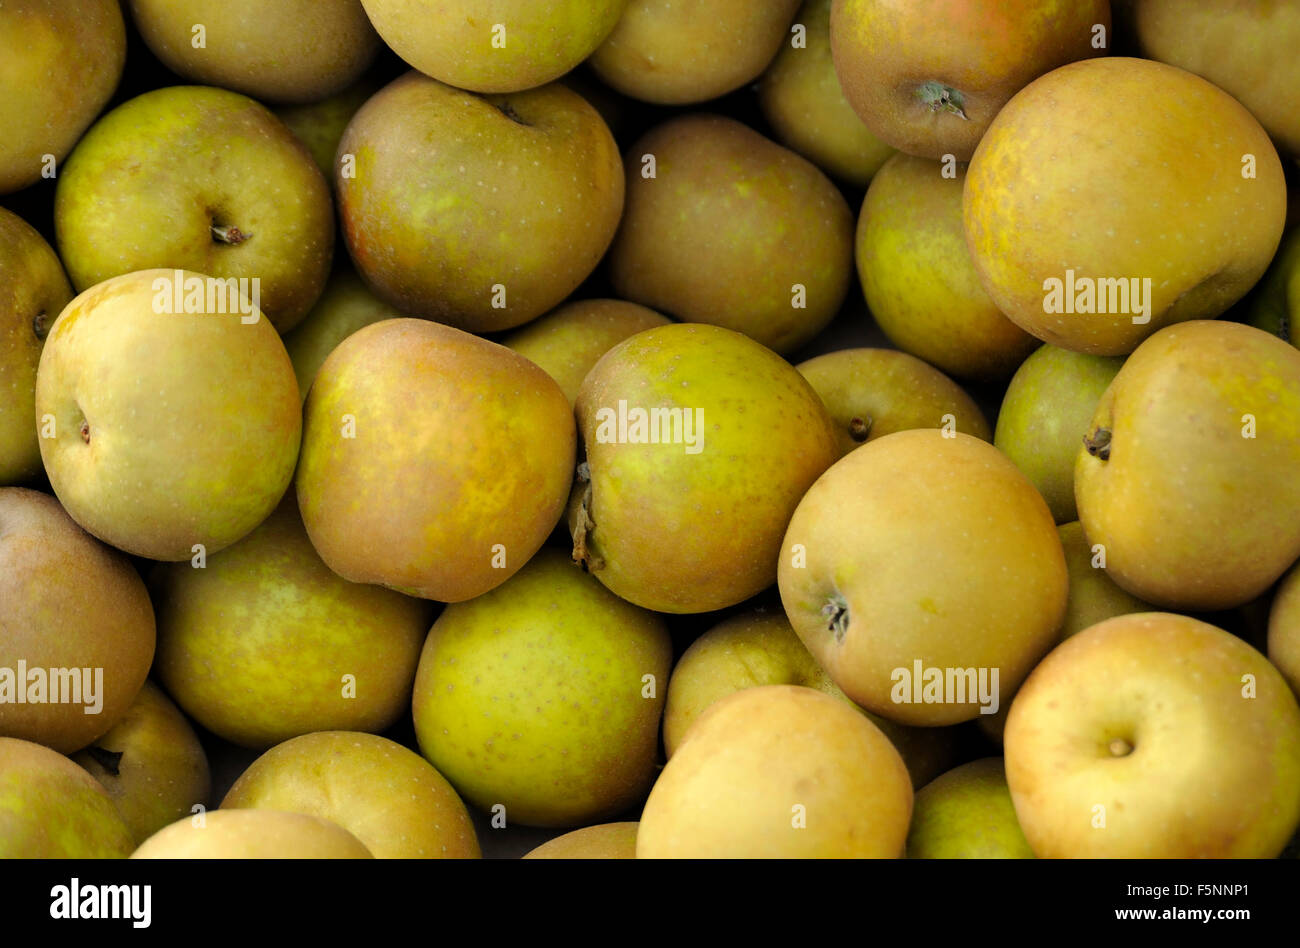 A BOX OF ORGANIC APPLES AT A FARMERS MARKET IN DEVON ENGLAND Stock Photo